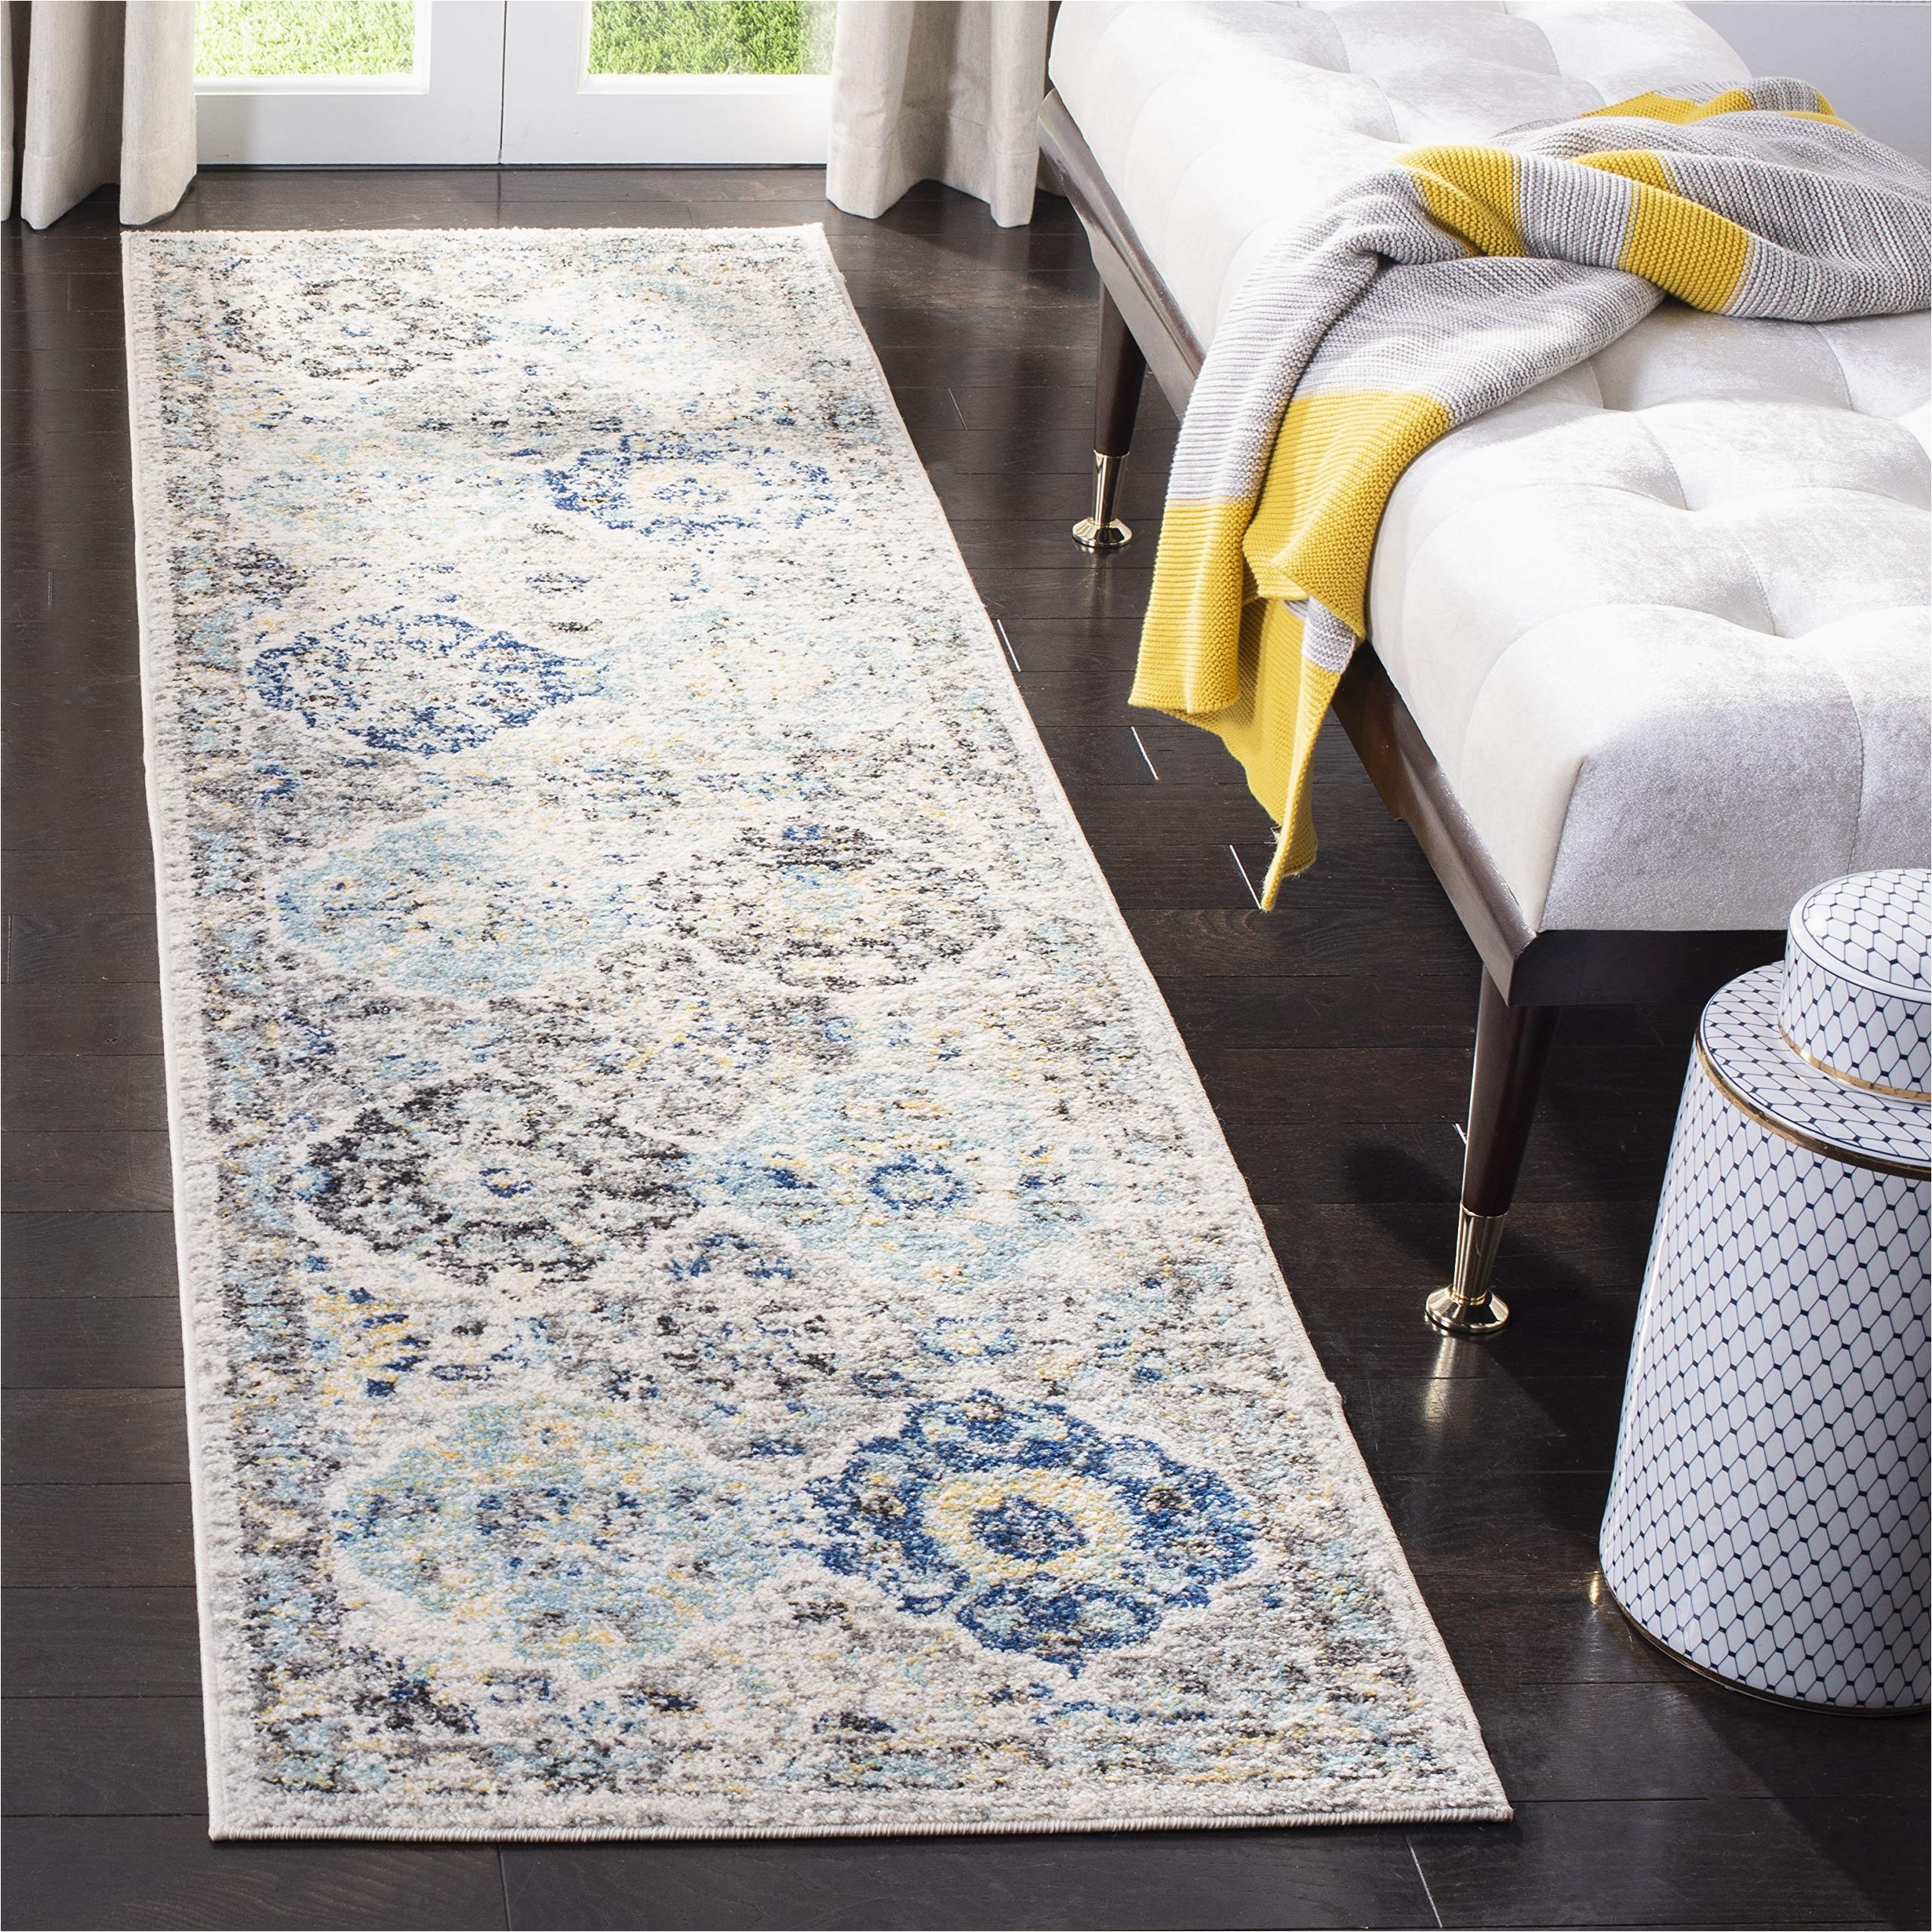 Safavieh Madison Judith Geometric Floral area Rug or Runner Safavieh Madison Collection 2’3″ X 8′ Ivory / Aqua Mad611a Boho Chic Floral Medallion Trellis Distressed Non-shedding Living Room Entryway Foyer …